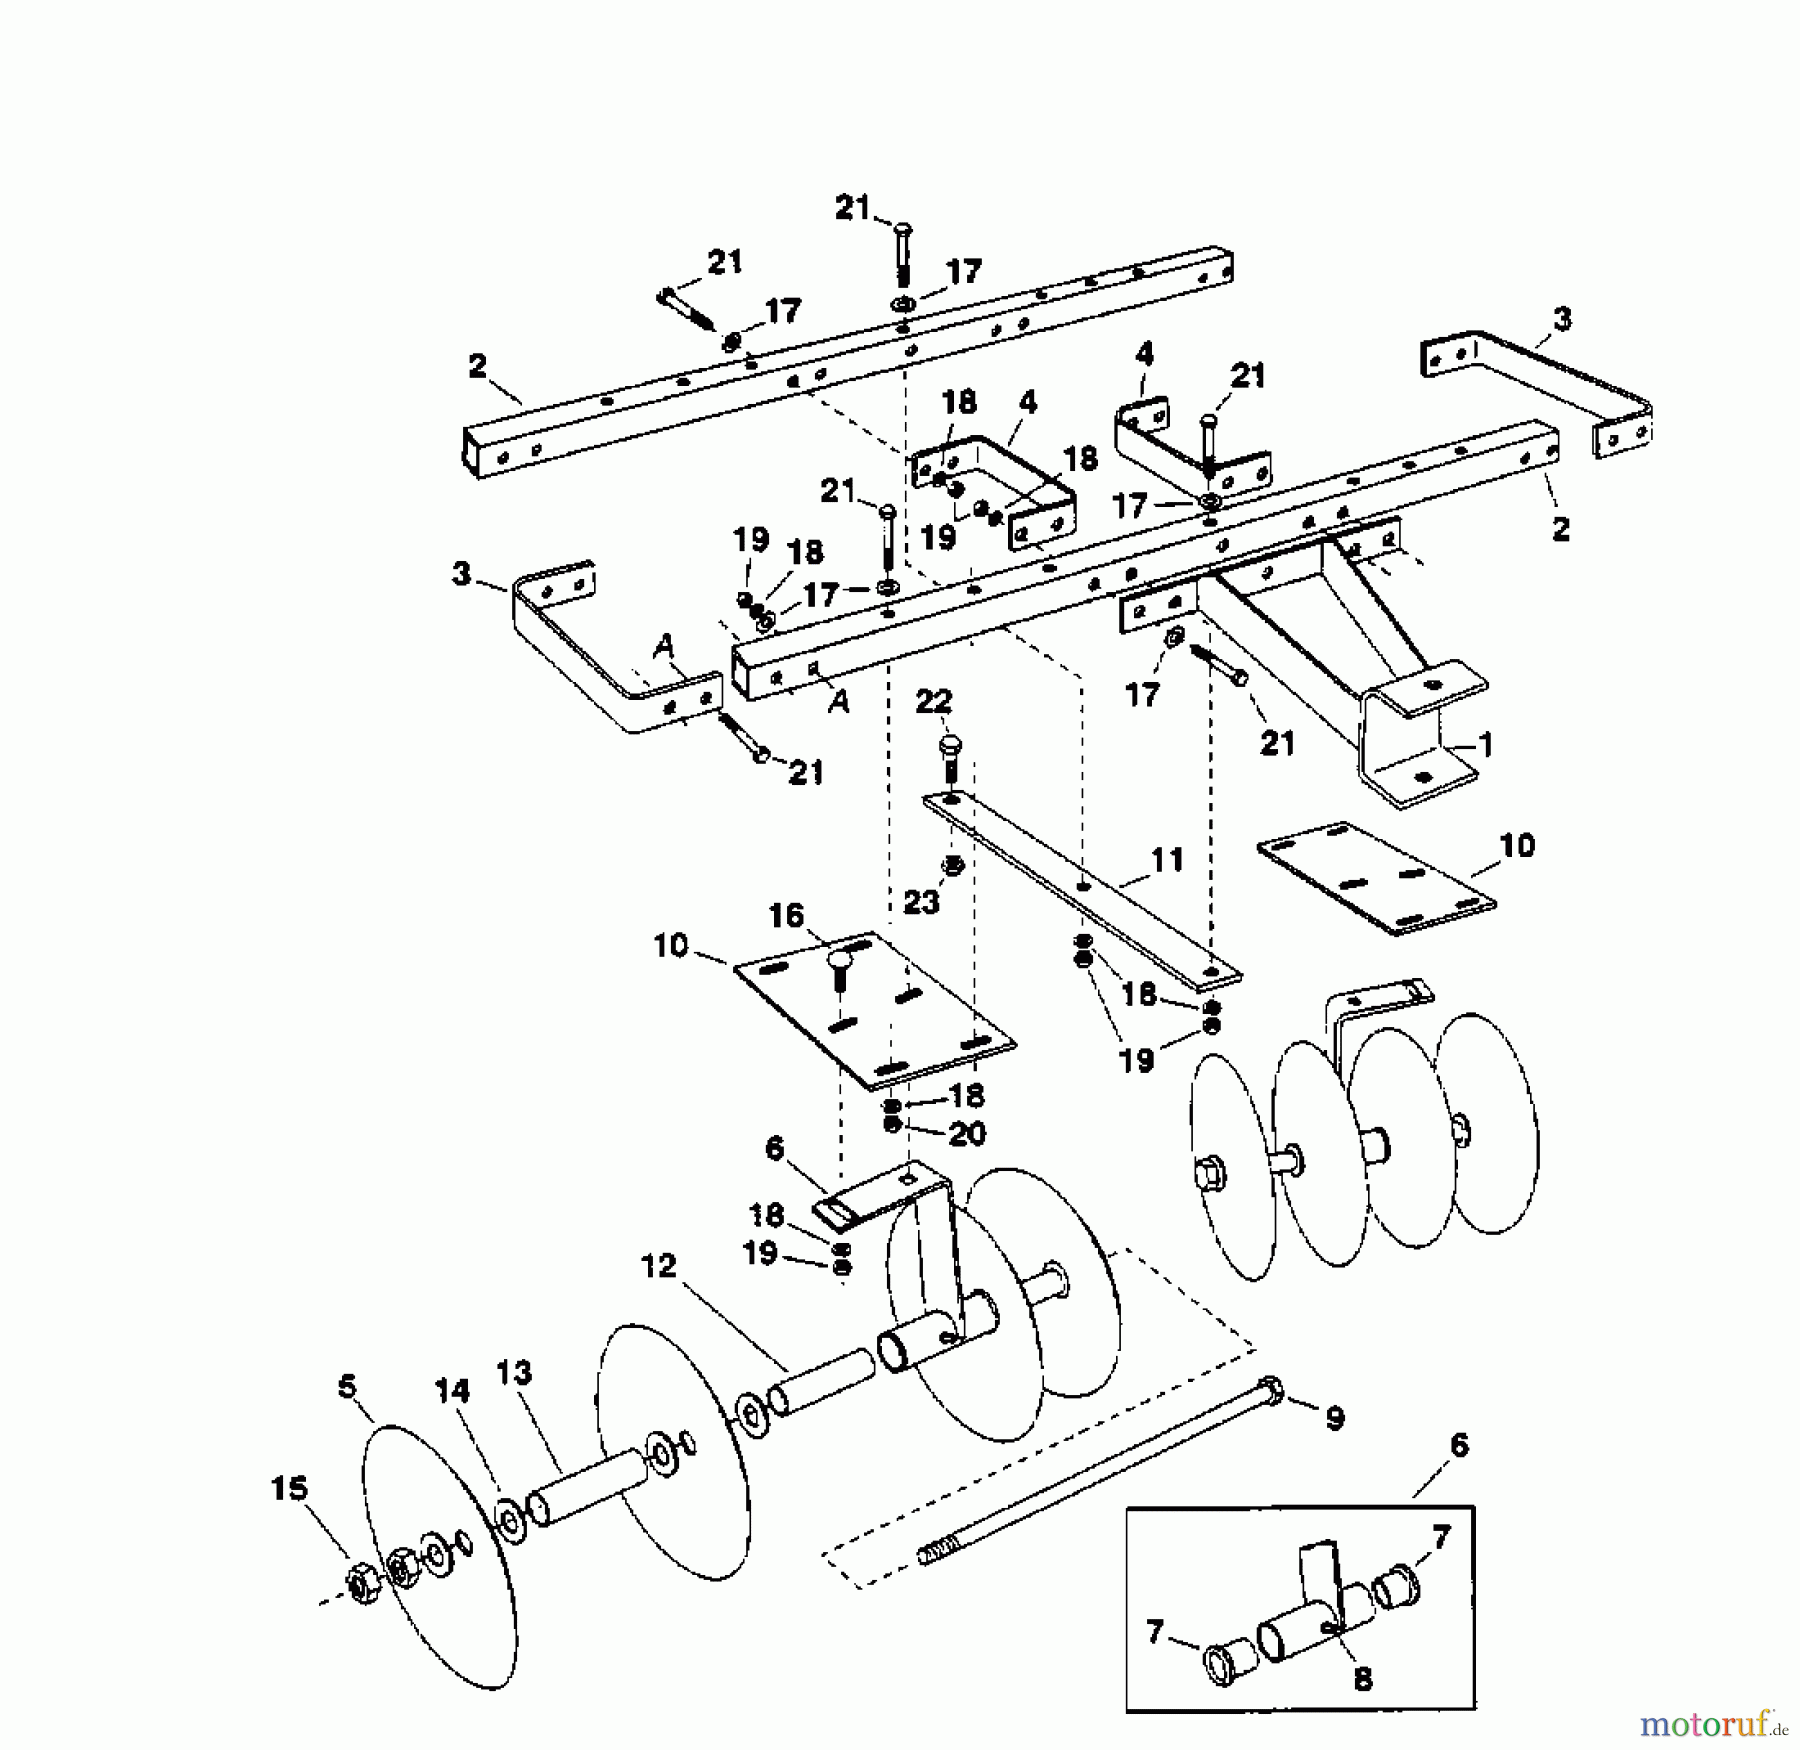  MTD Accessories Accessories garden and lawn tractors Cultivator 45-0266  (OEM-190-980) OEM-190-980  (2002) Basic machine